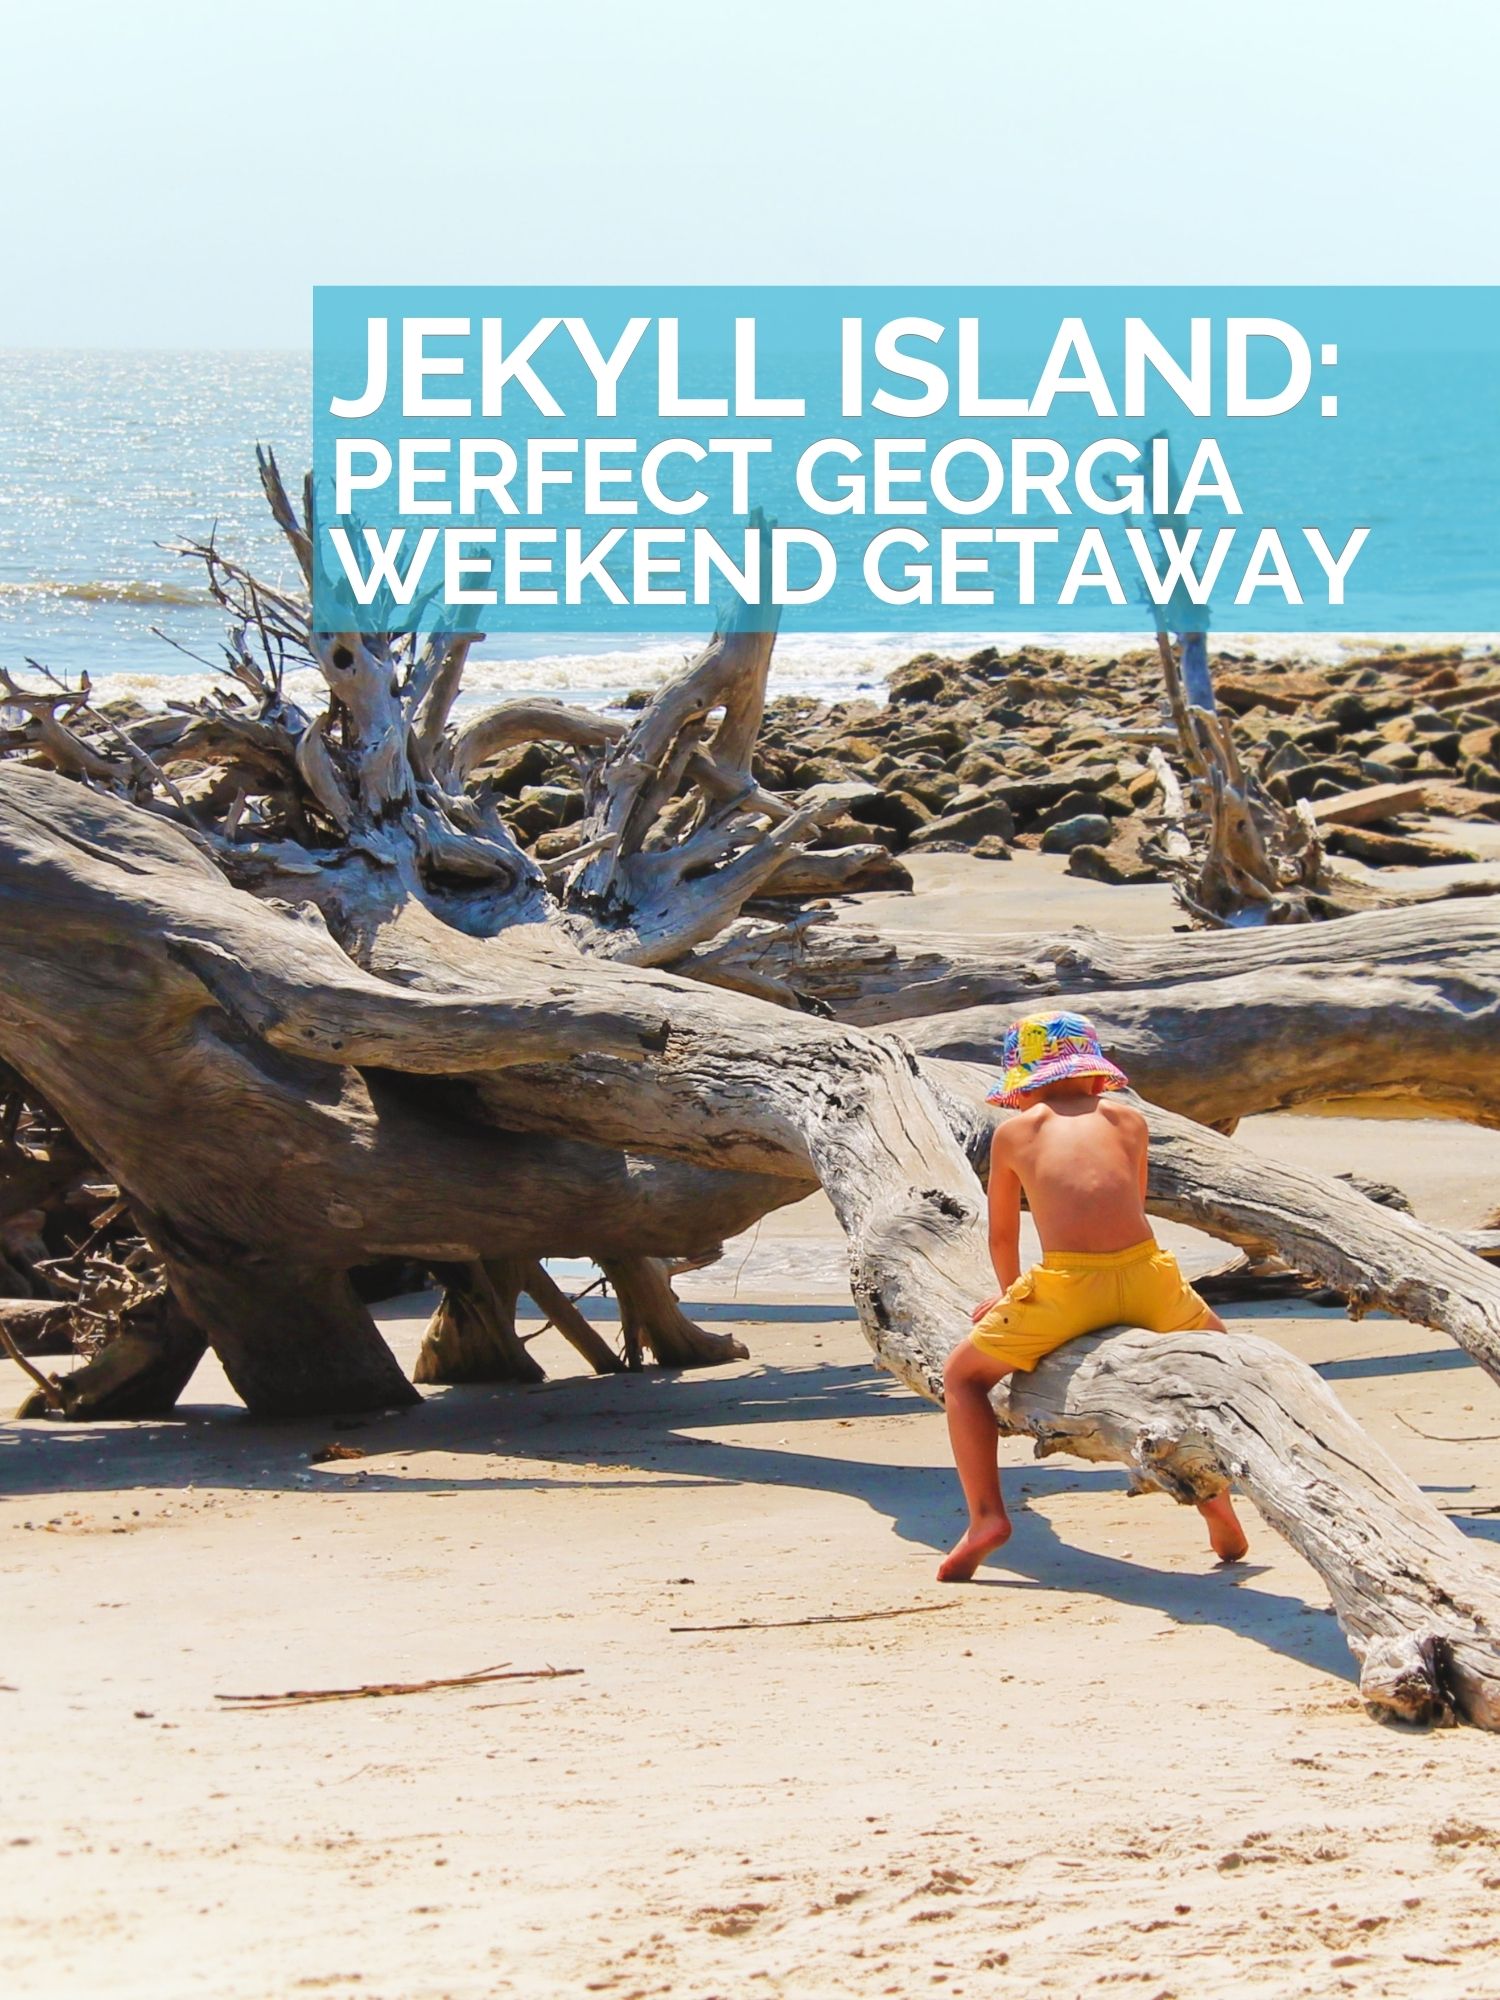 Jekyll Island on the Georgia coast is a perfect getaway. With beautiful beaches, historic sites and the Georgia Sea Turtle Center, it's an easy weekend trip or destination close to the Florida border.